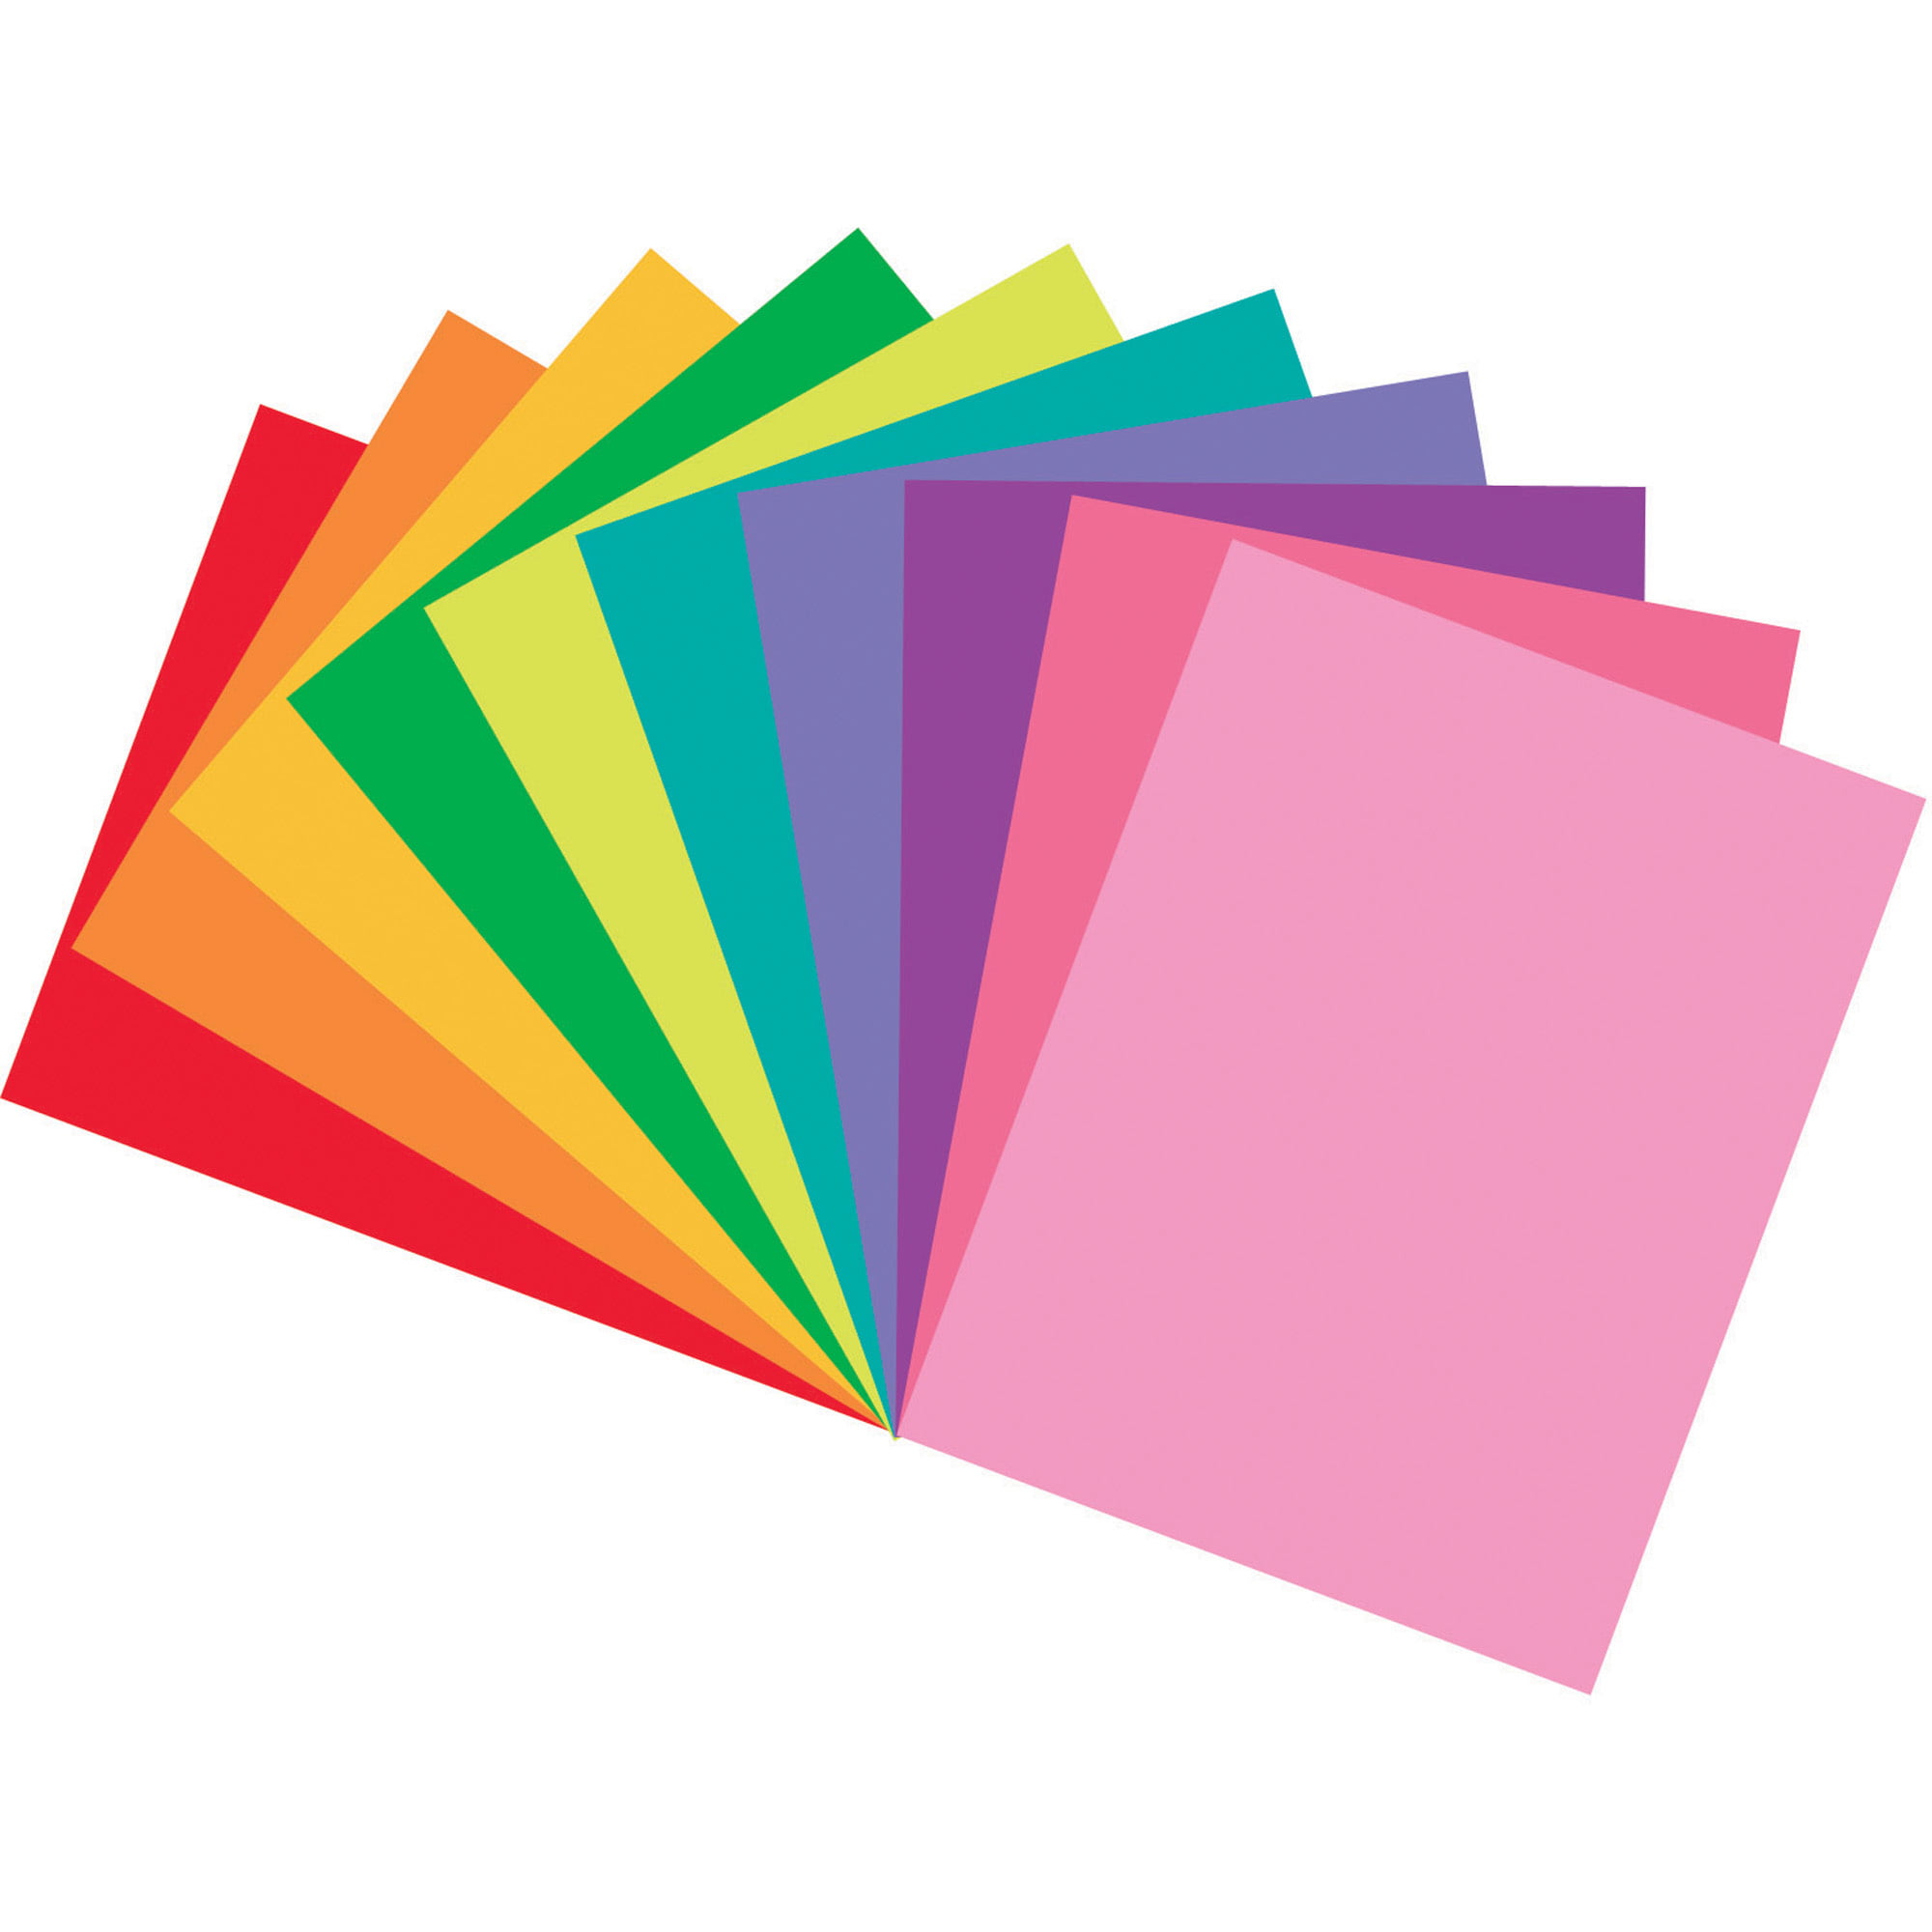 Pacon Tru-Ray Construction Paper - 9 x 12, Assorted Brights, 50 Sheets